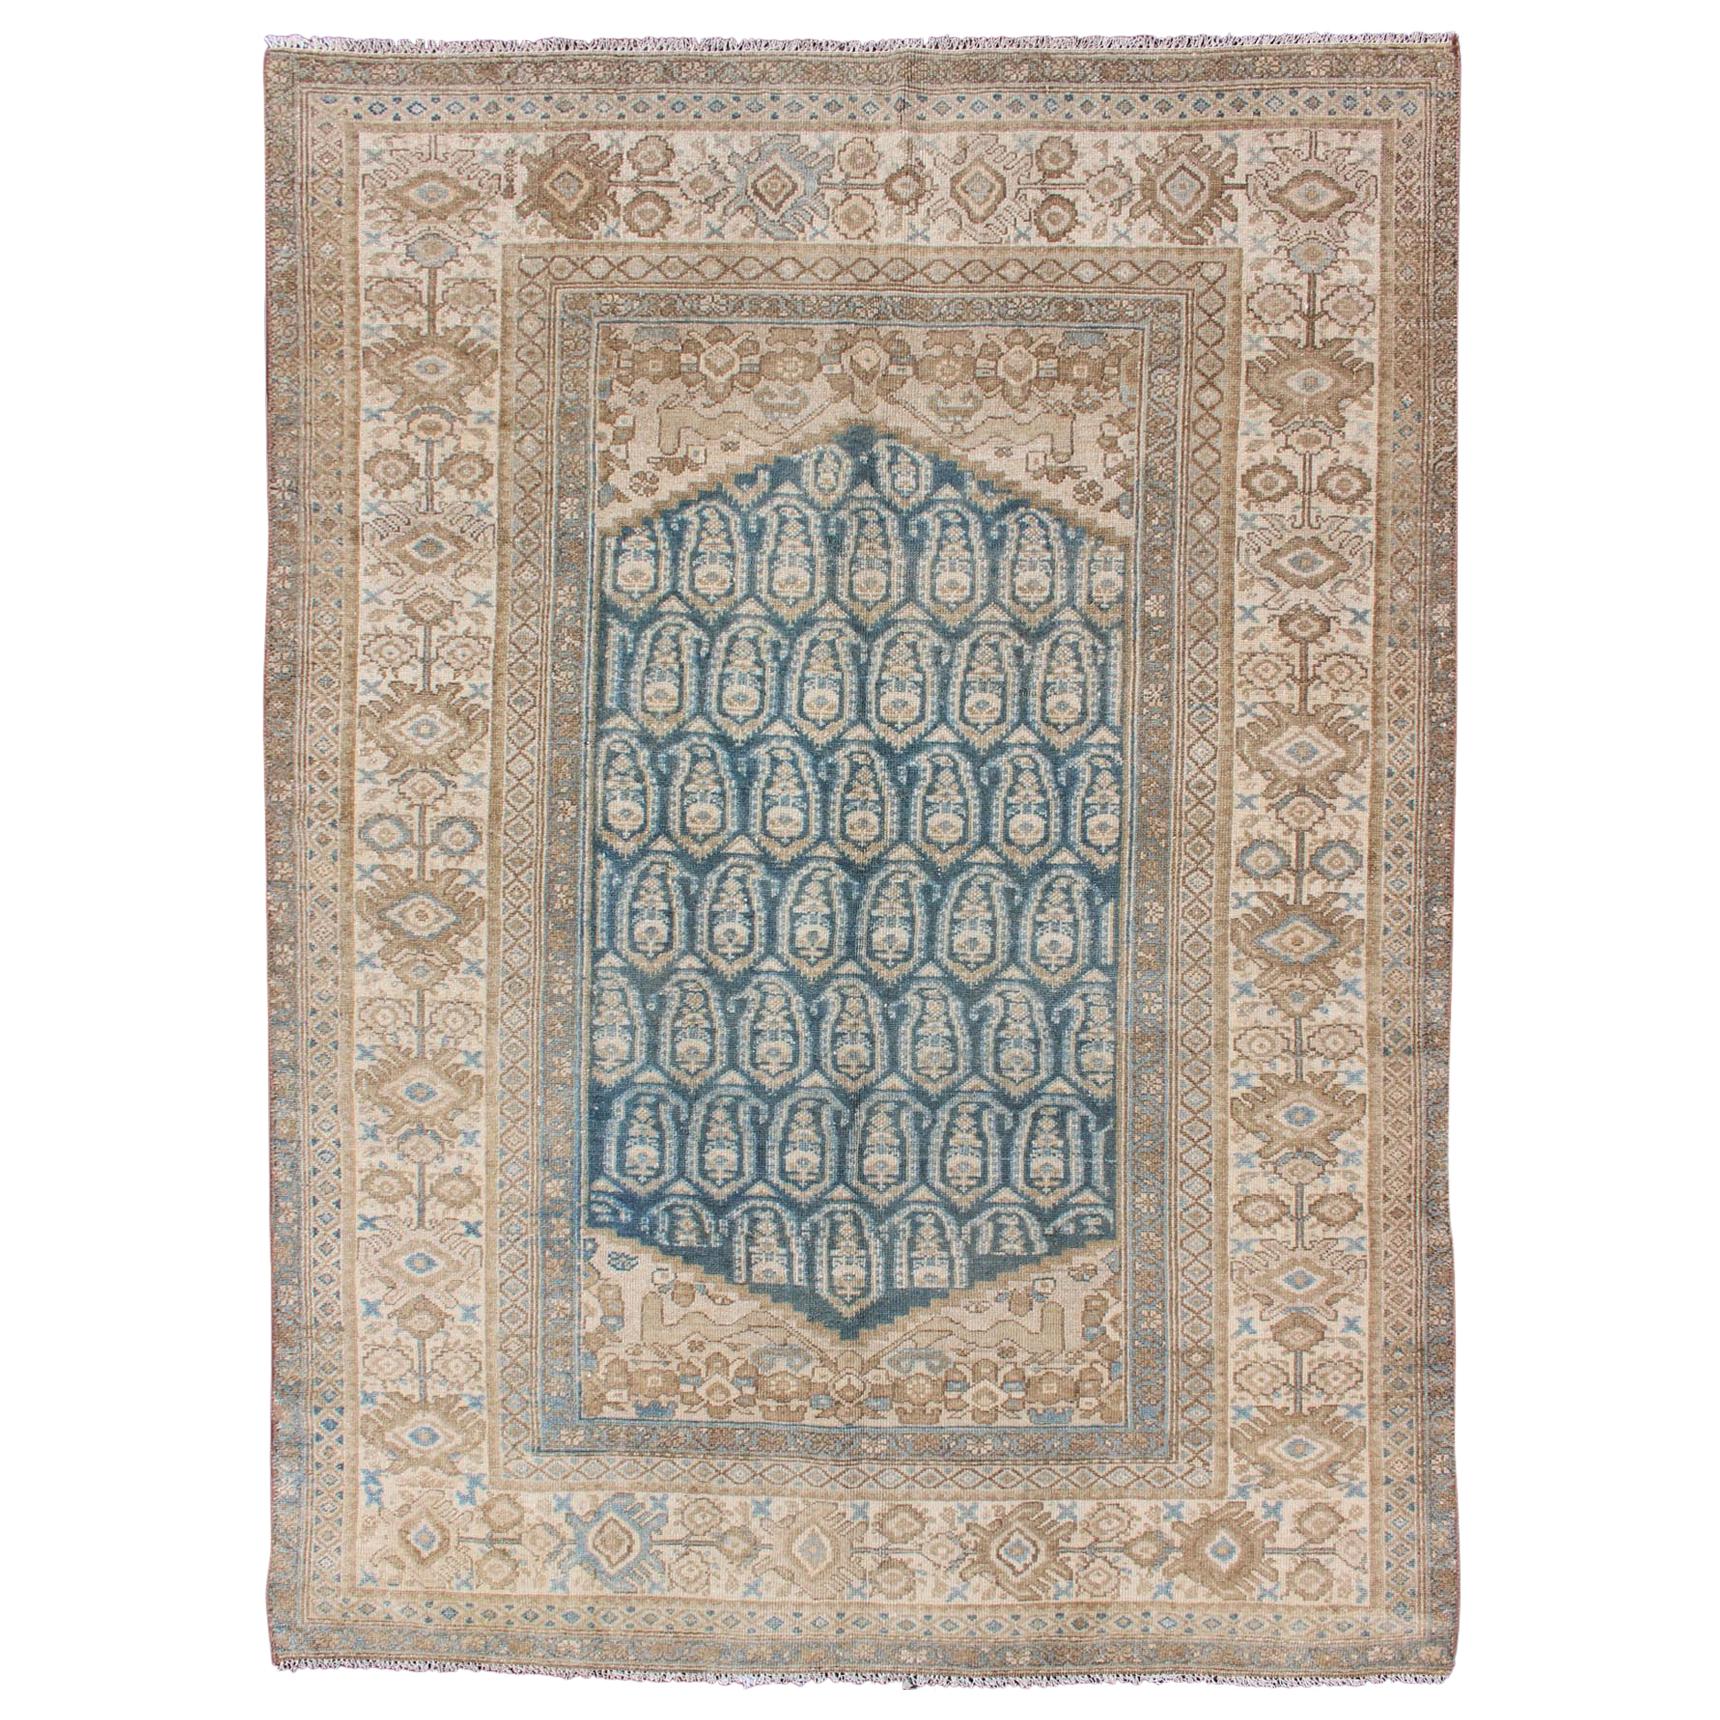 Antique Persian Malayer Rug with Traditional All-Over Design and Large Borders